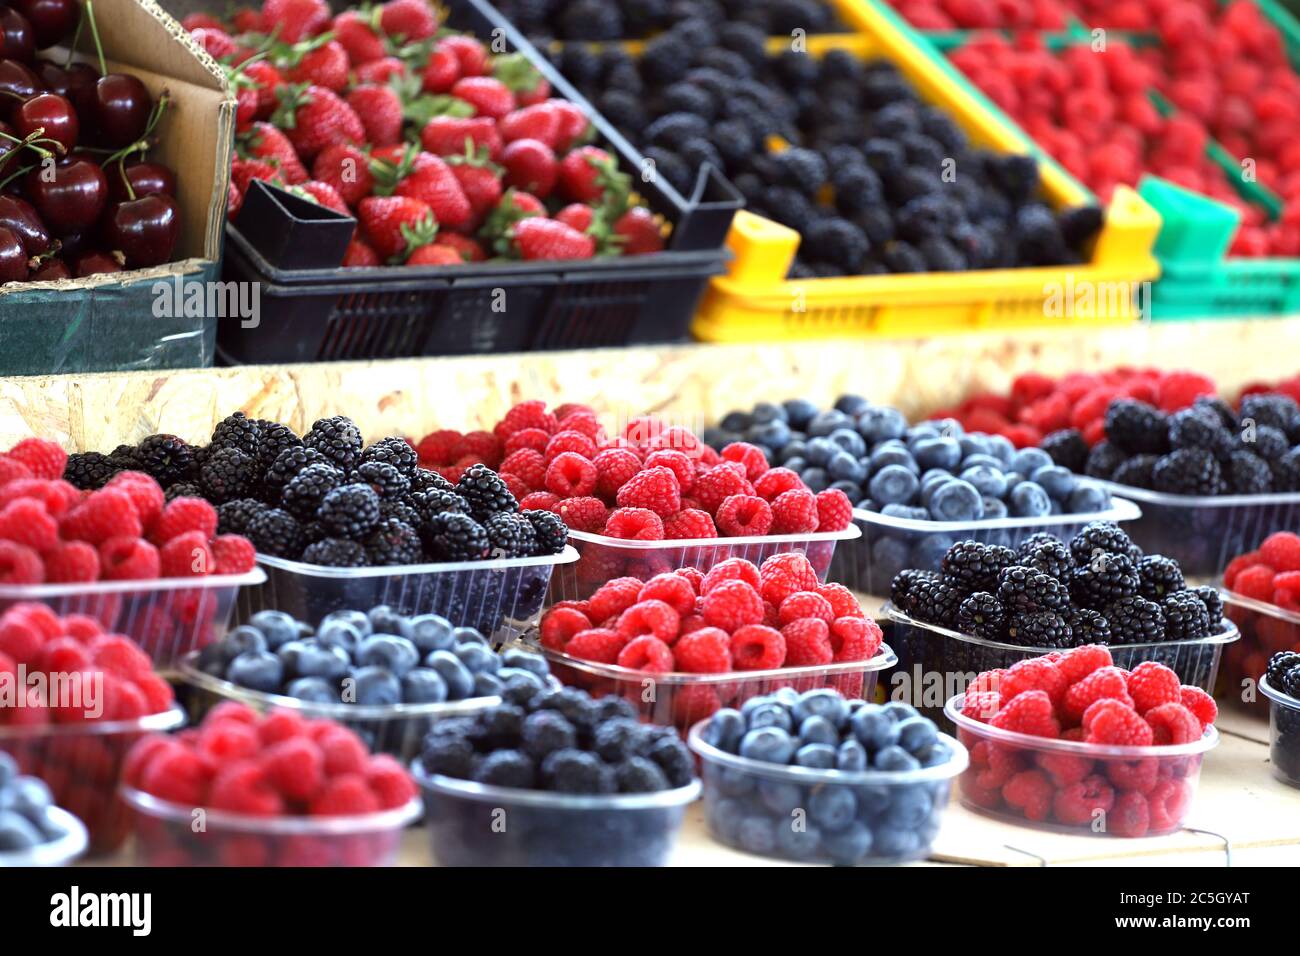 Raspberries, blueberries and blackberries on a market in plastic bowls. Fruits pattern. Stock Photo